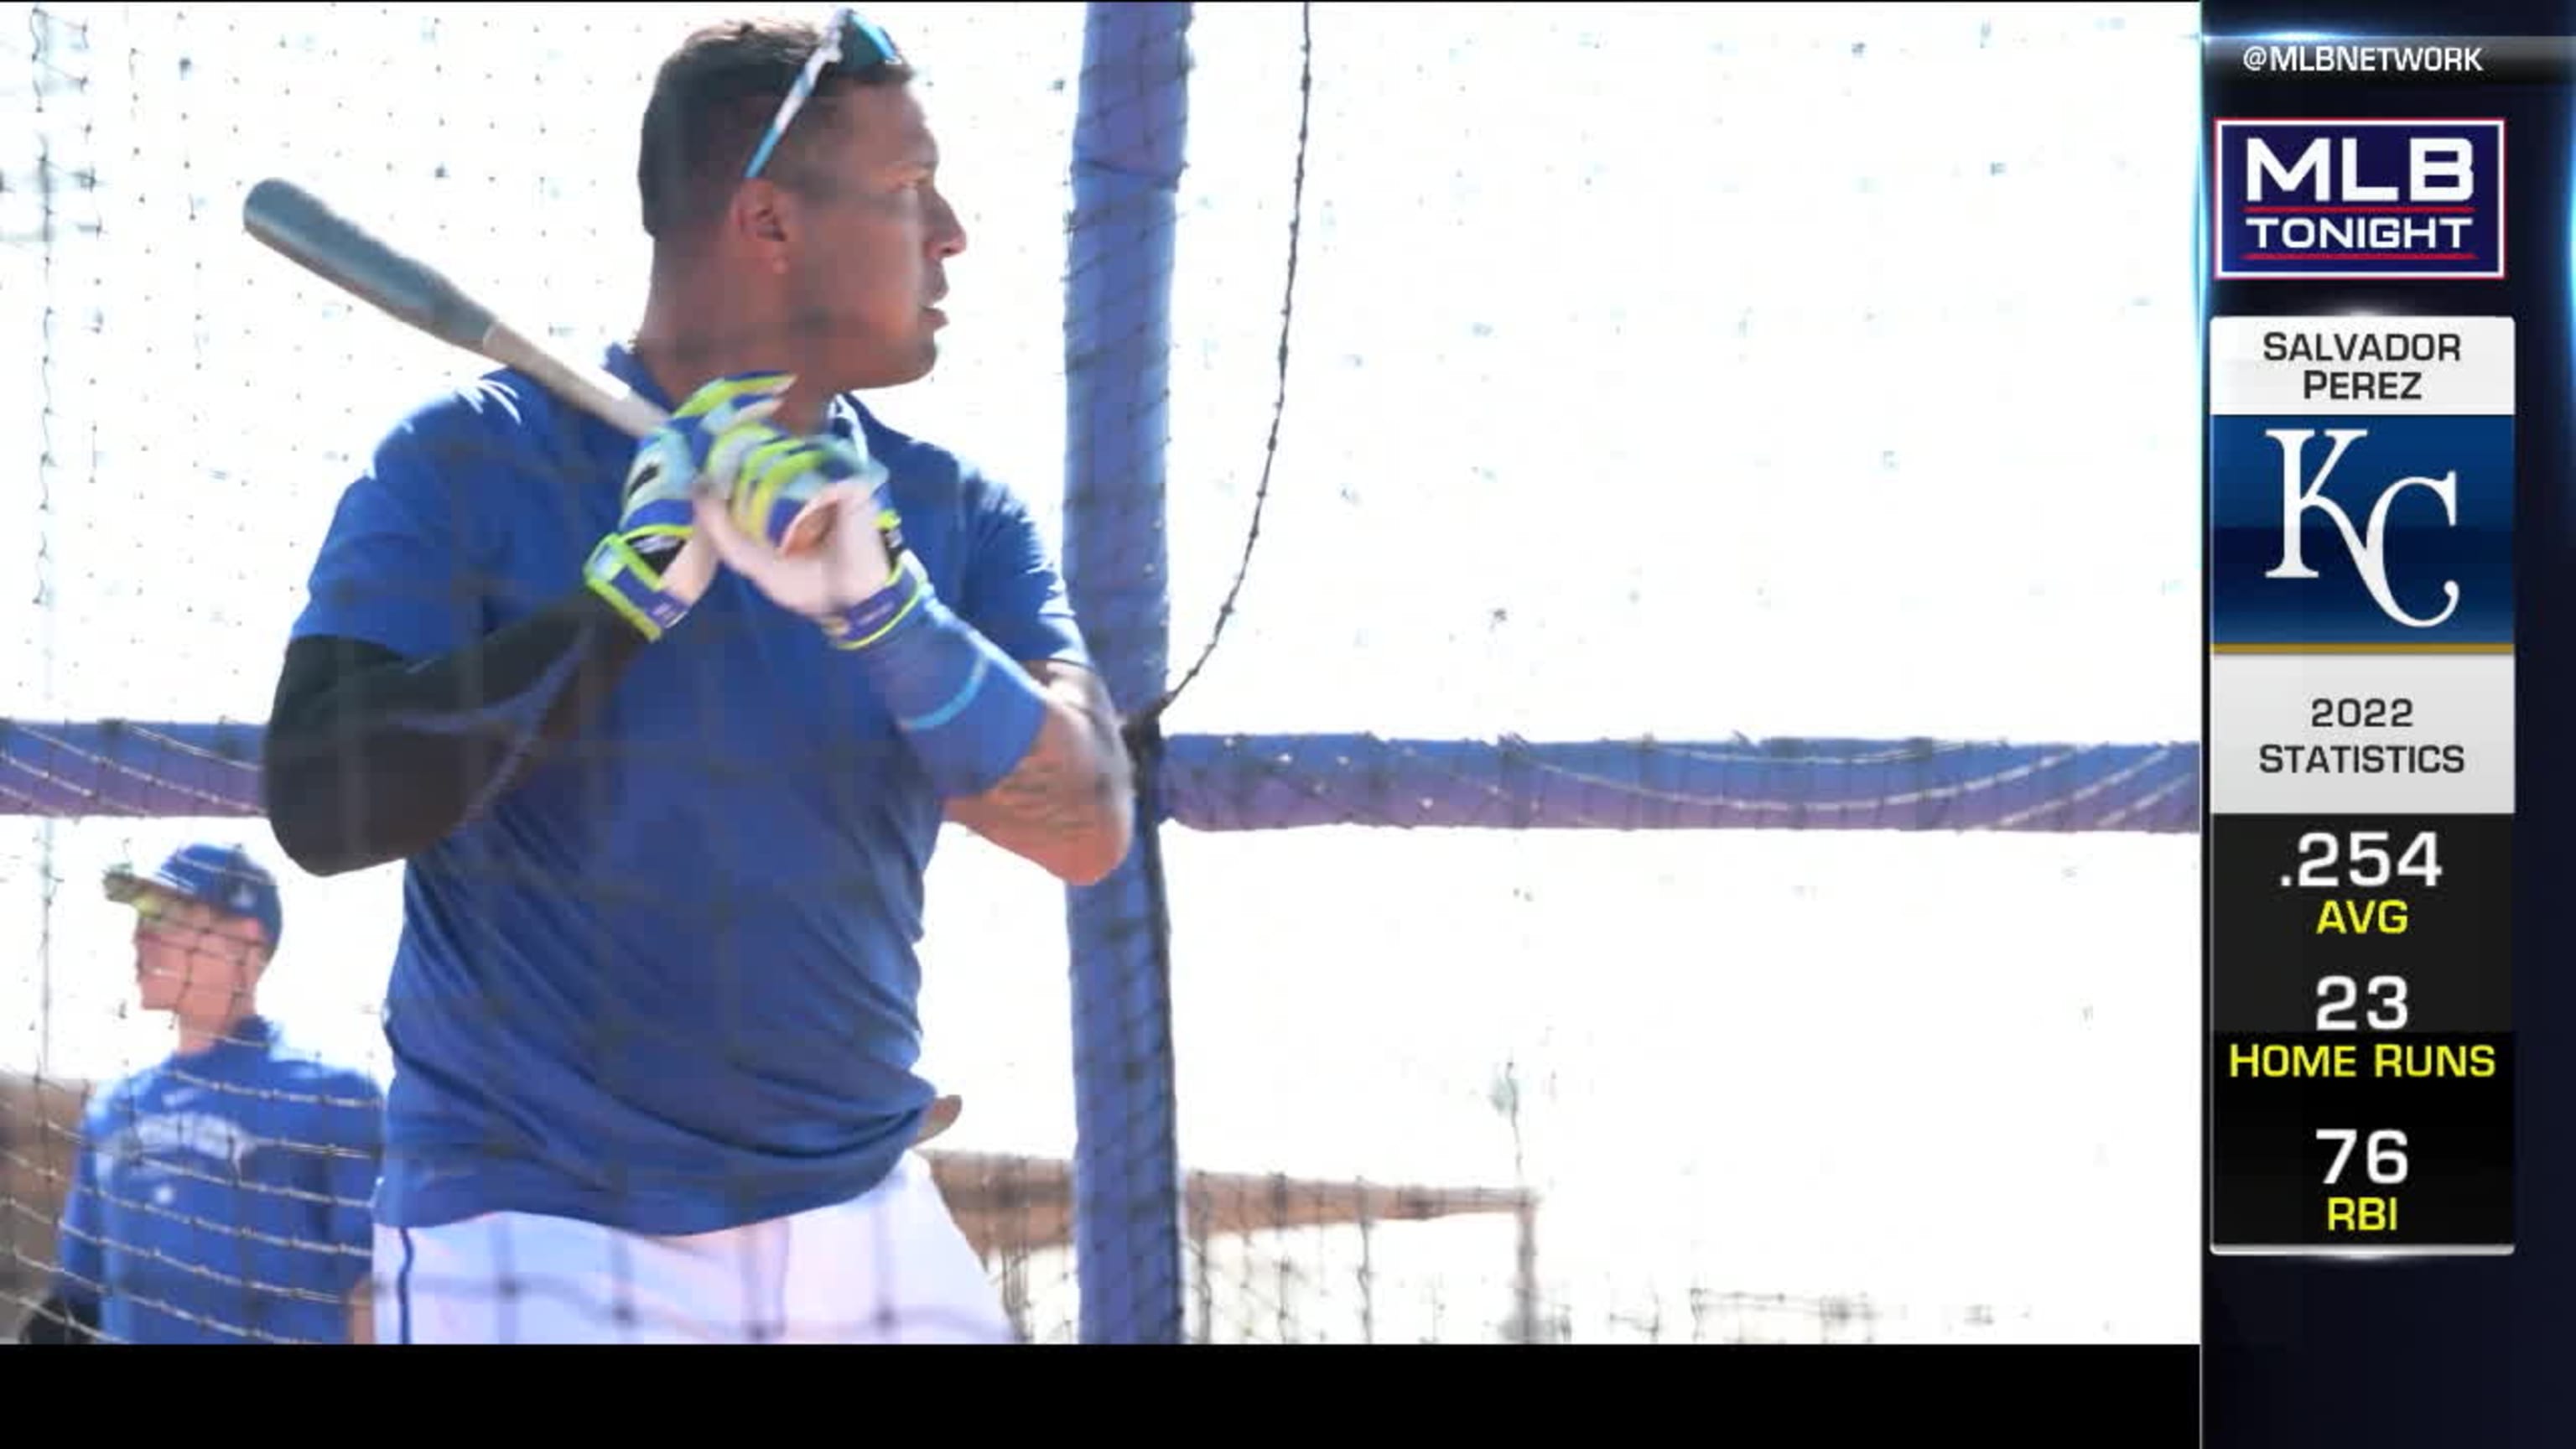 Special day': Salvador Perez reflects on being named KC Royals' 4th ever  team captain